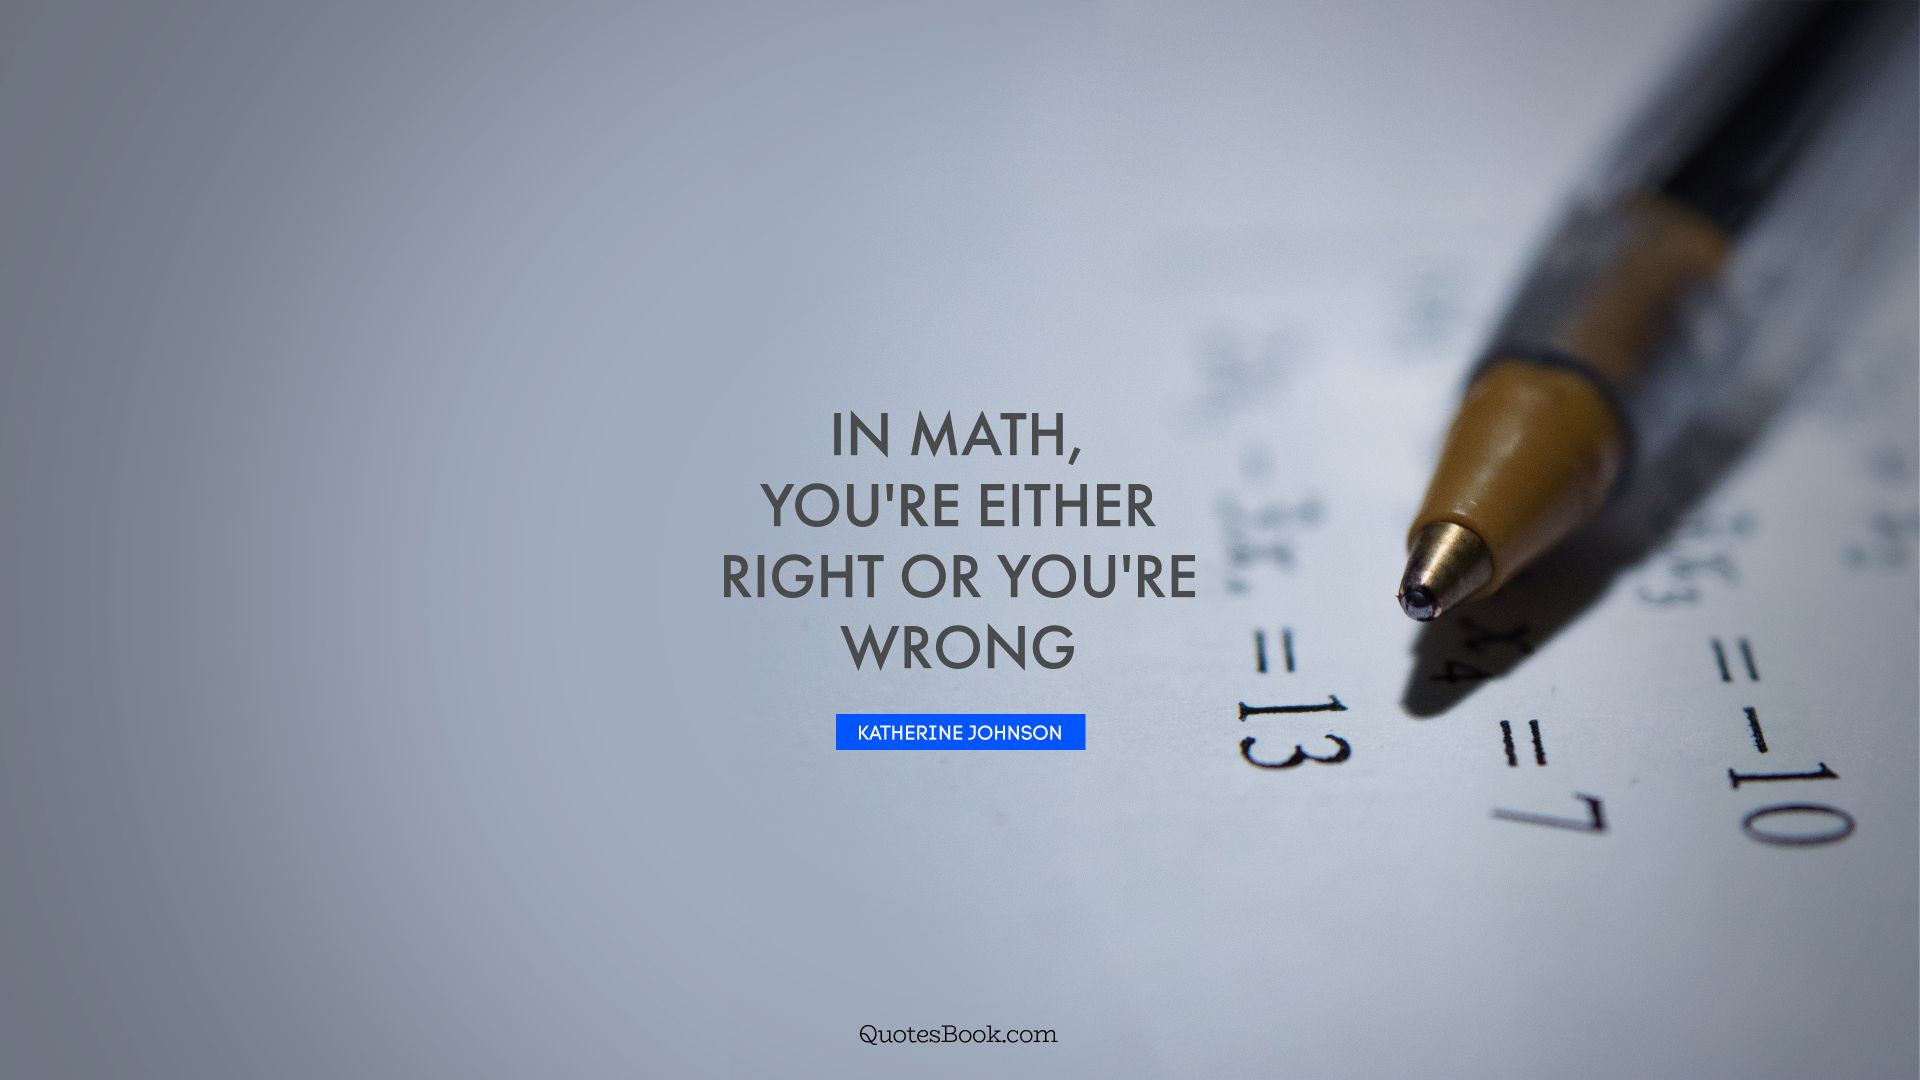 In math, you're either right or you're wrong. - Quote by Katherine Johnson